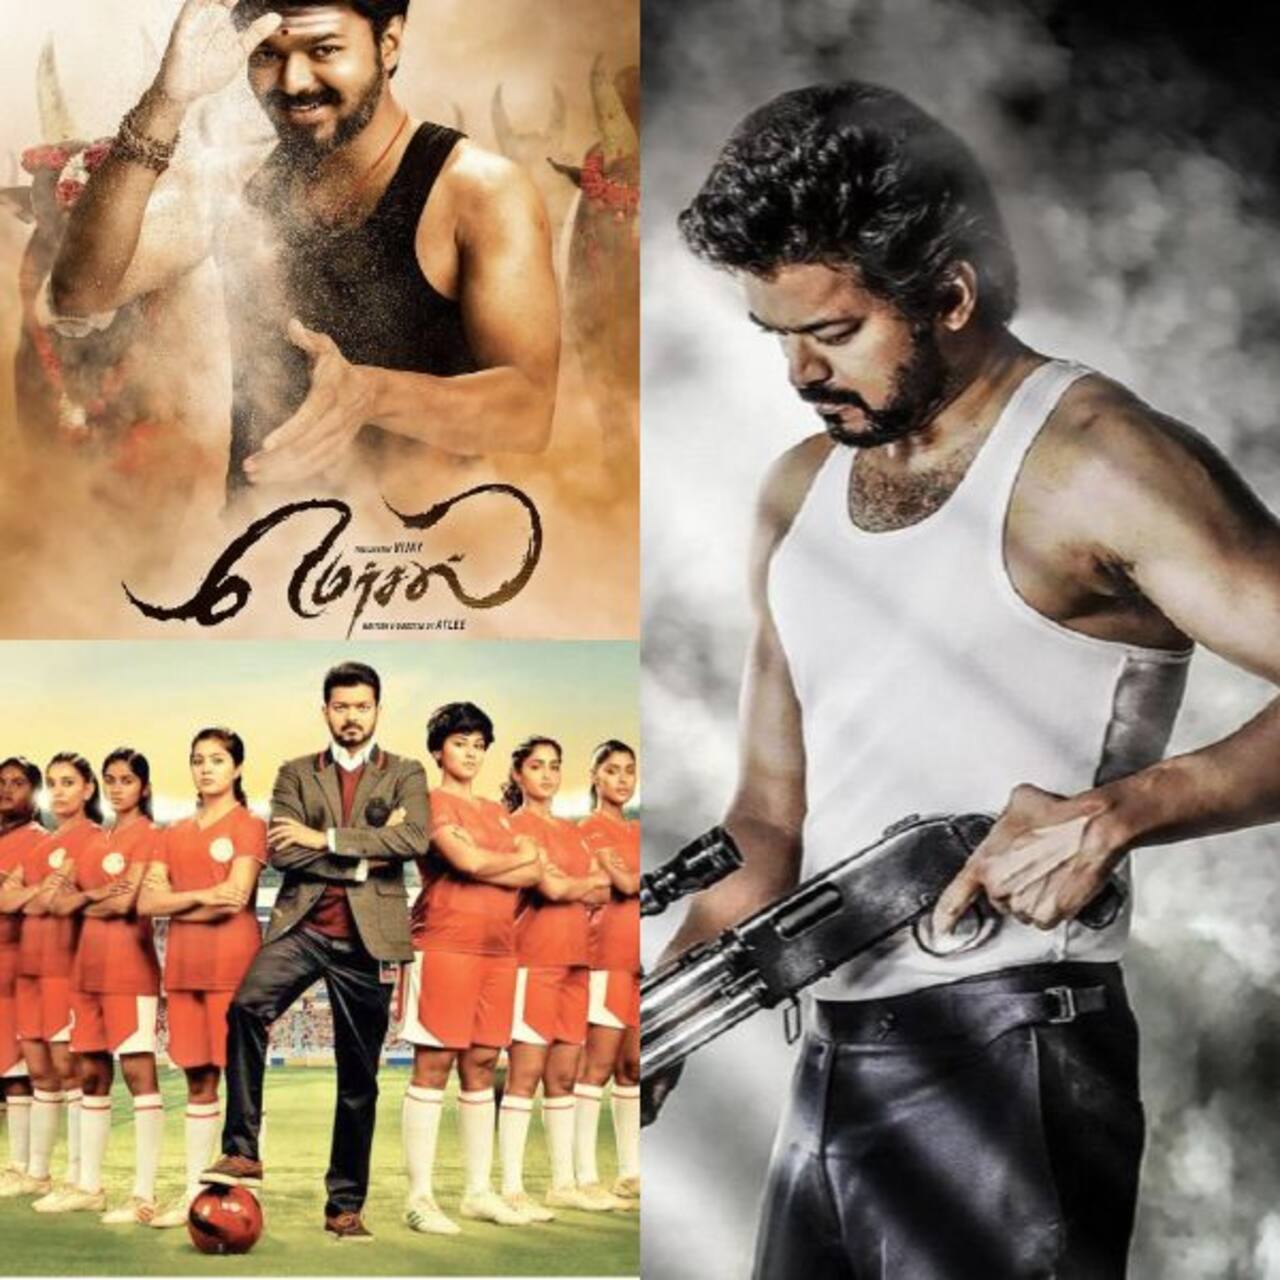 What to watch on OTT Today: As Beast disappoints Thalapathy Vijay fans, here are his top rated films to stream now on ZEE5, Netflix and more